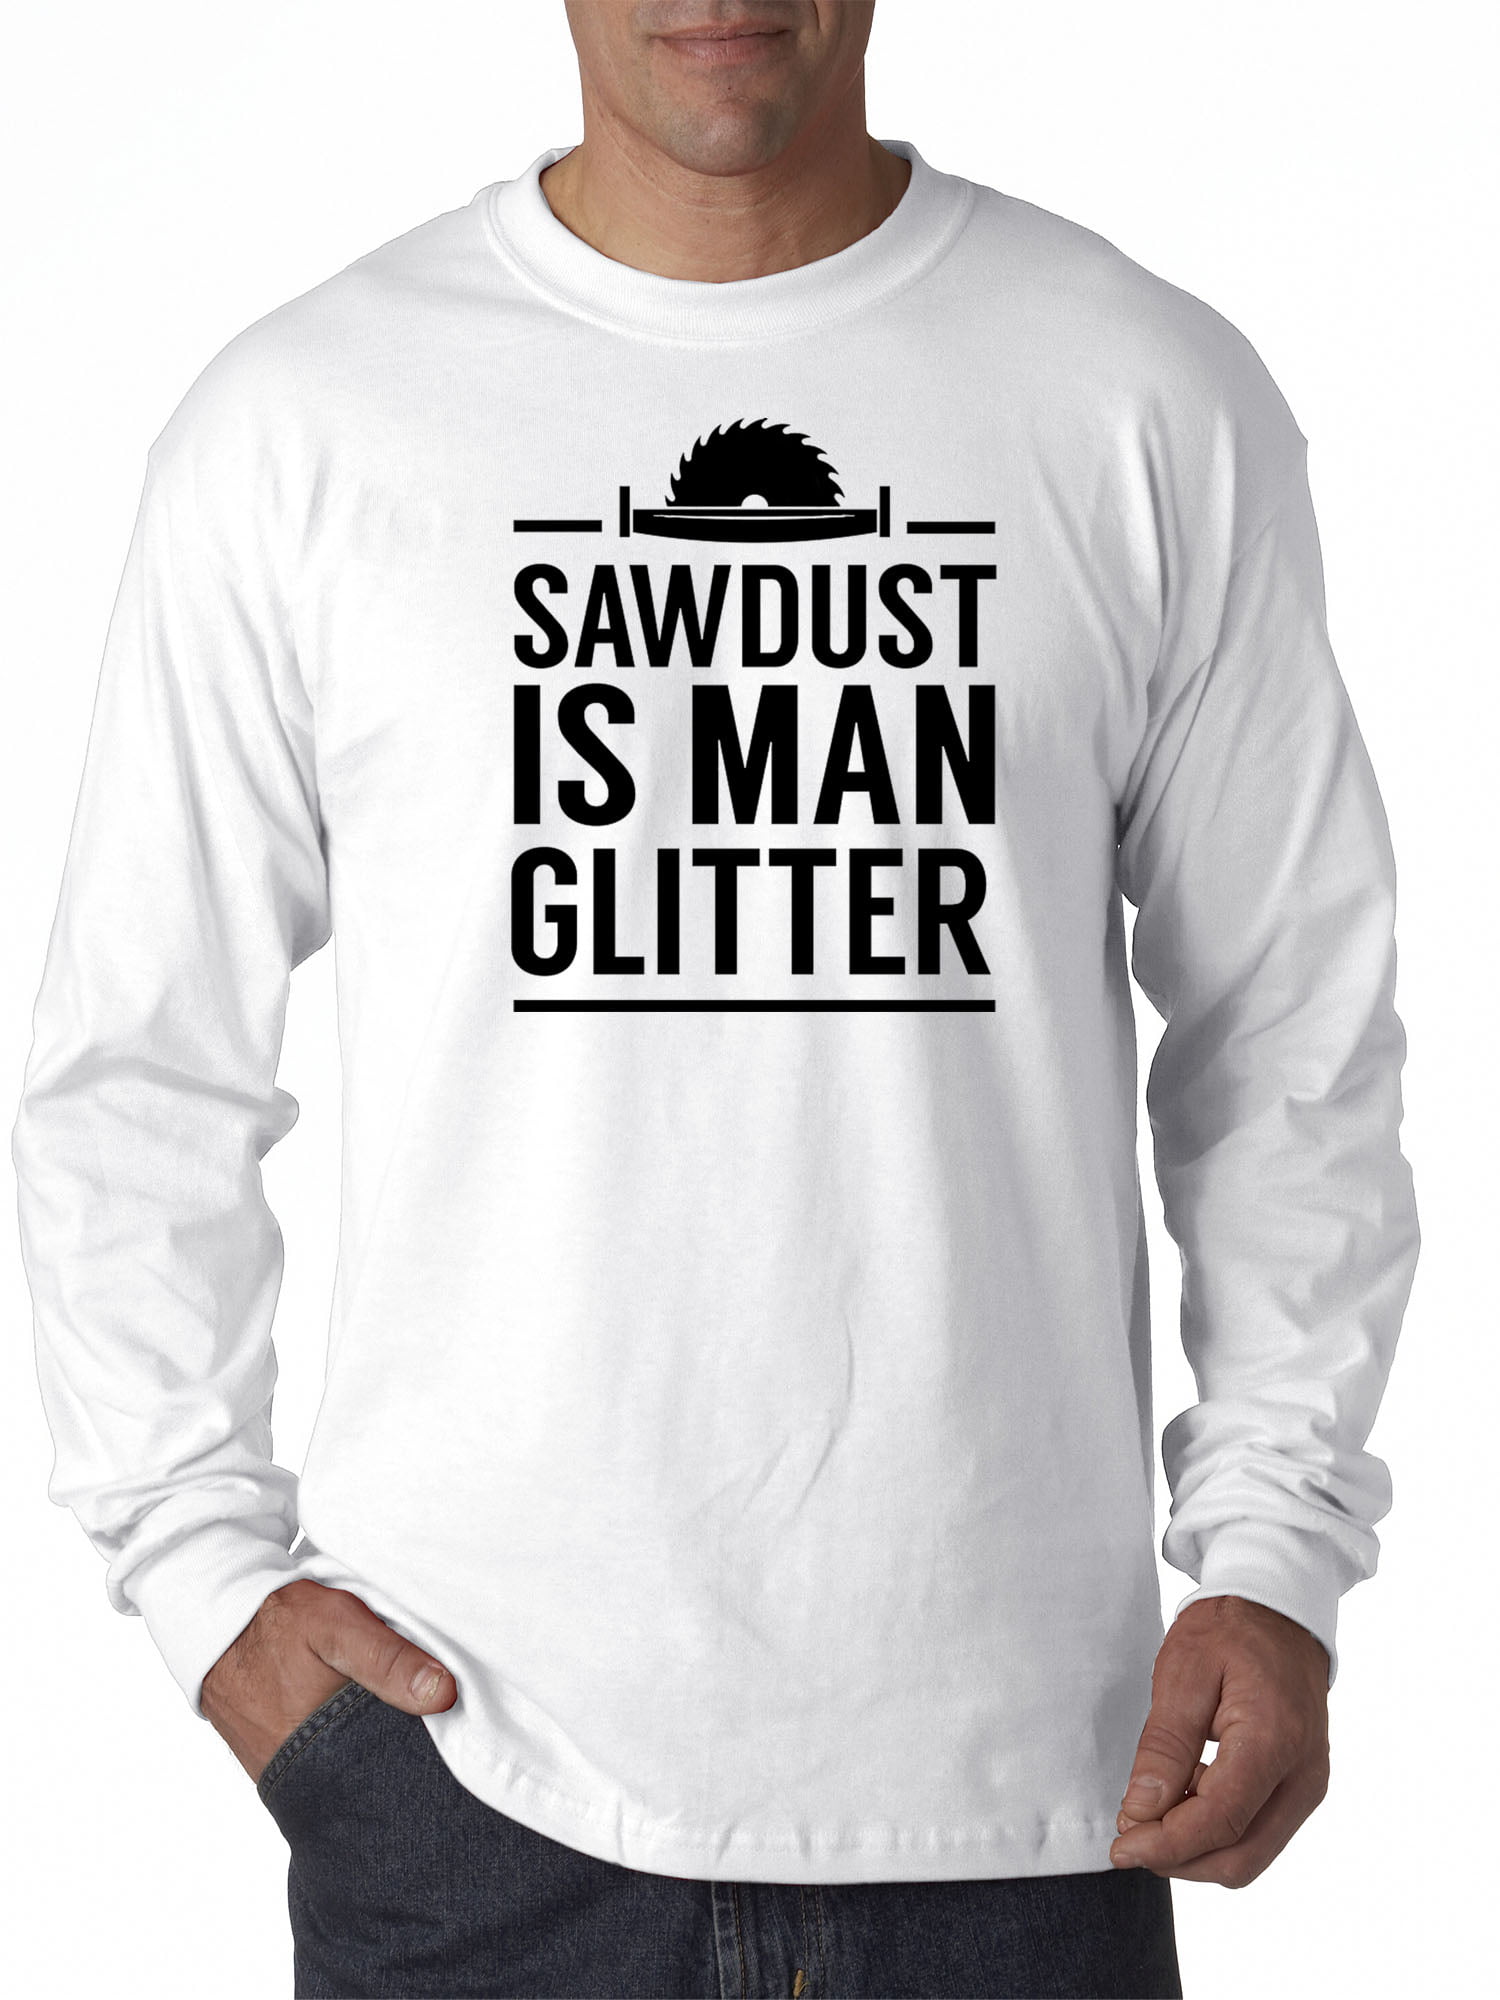 Details about   Sawdust Is Man Glitter You Mean Man Glitter vintage Logo Funny T Shirt S-3XL 